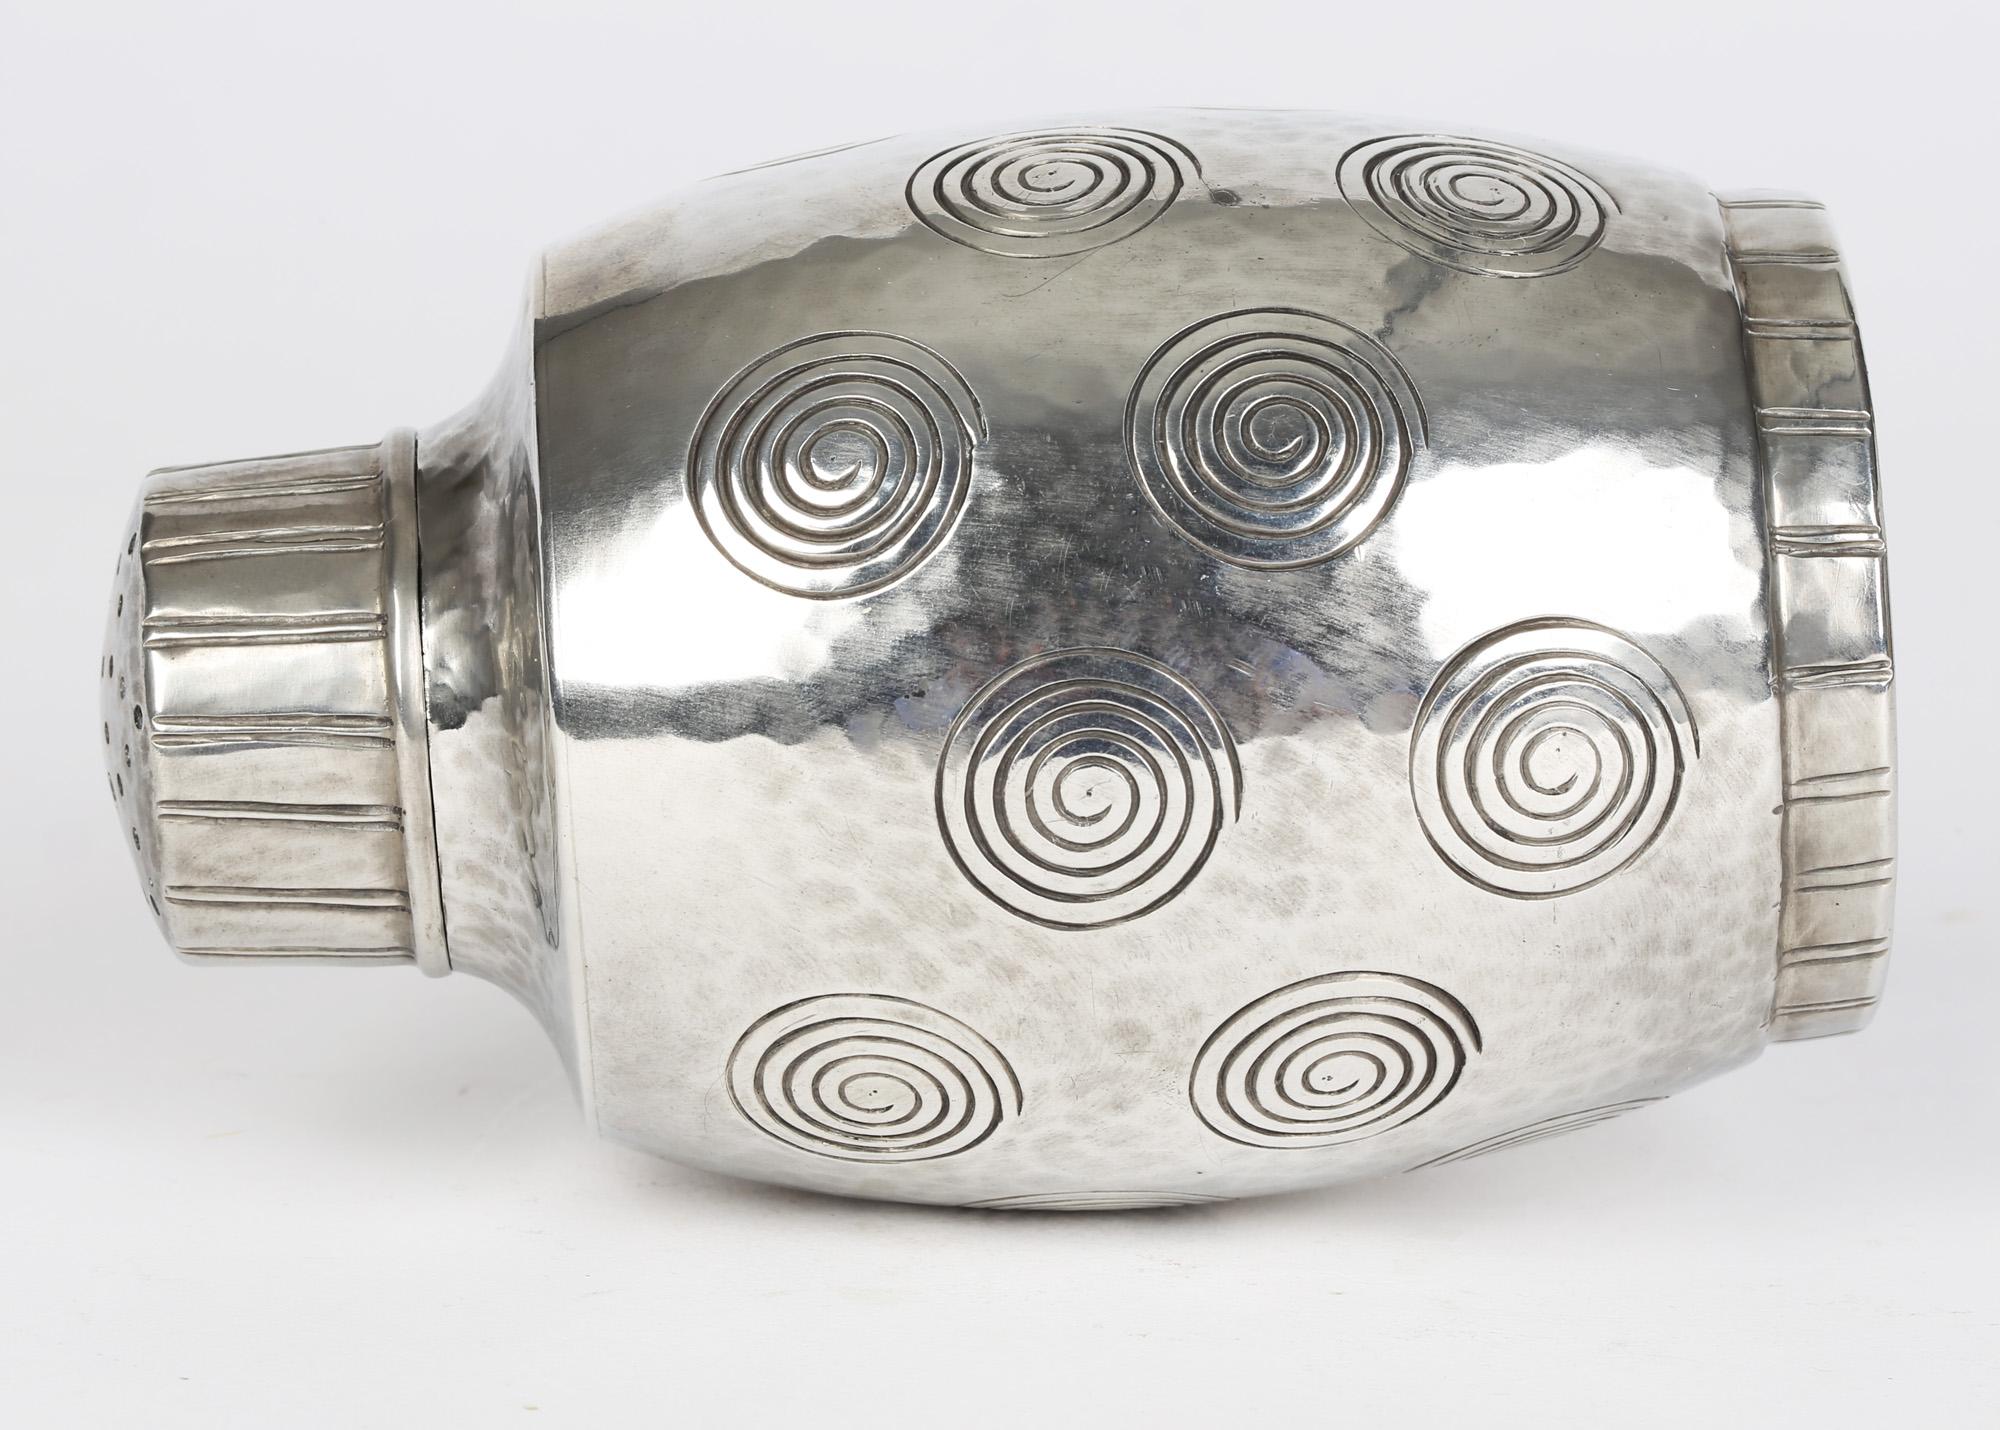 Tudric For Liberty & Co Pewter Barrel Shaped Swirl Design Sugar Shaker In Good Condition For Sale In Bishop's Stortford, Hertfordshire